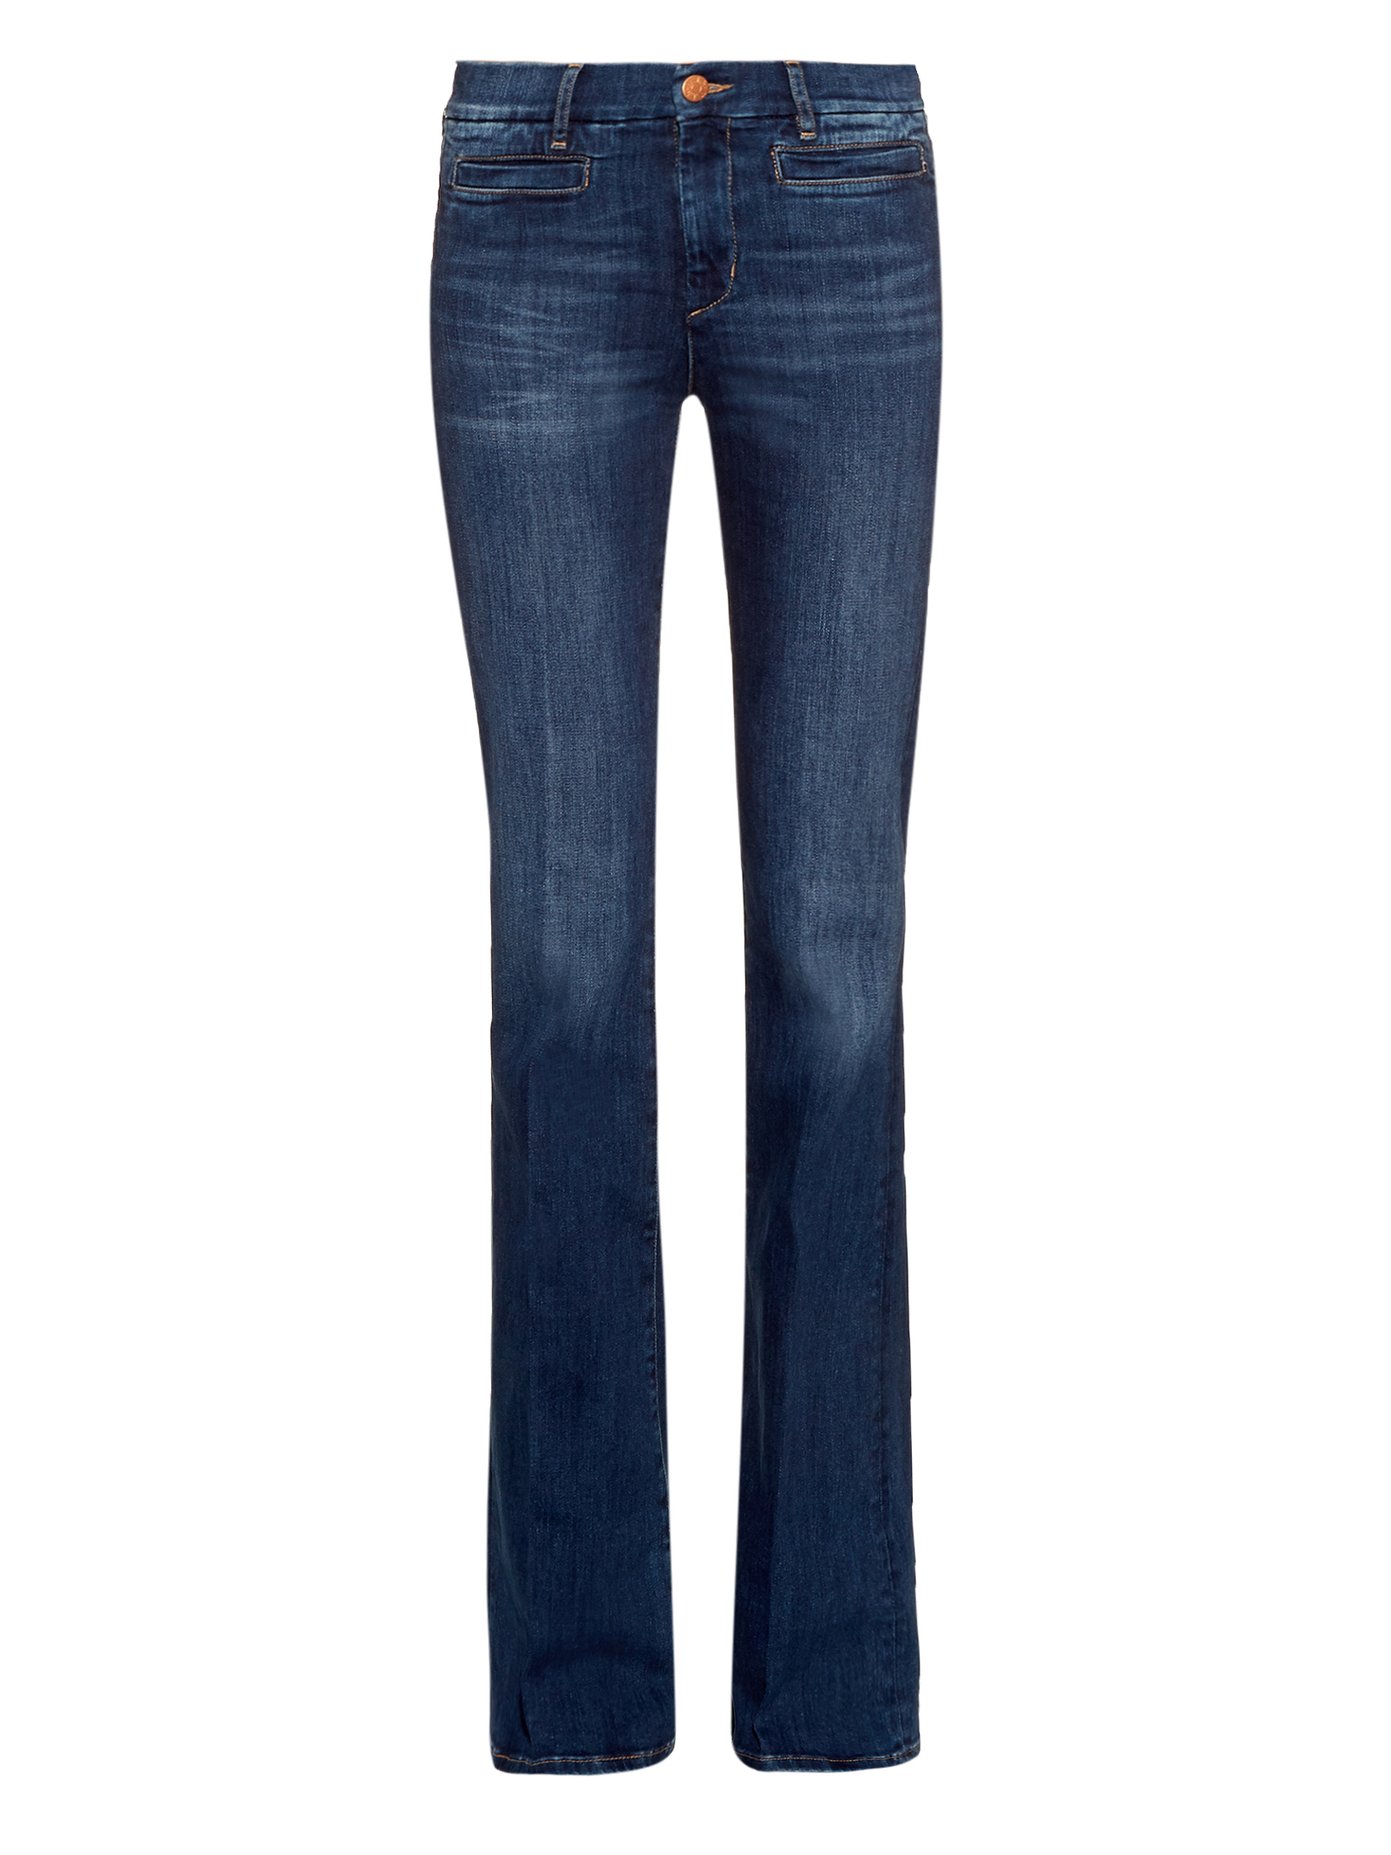 mih marrakesh flare jeans